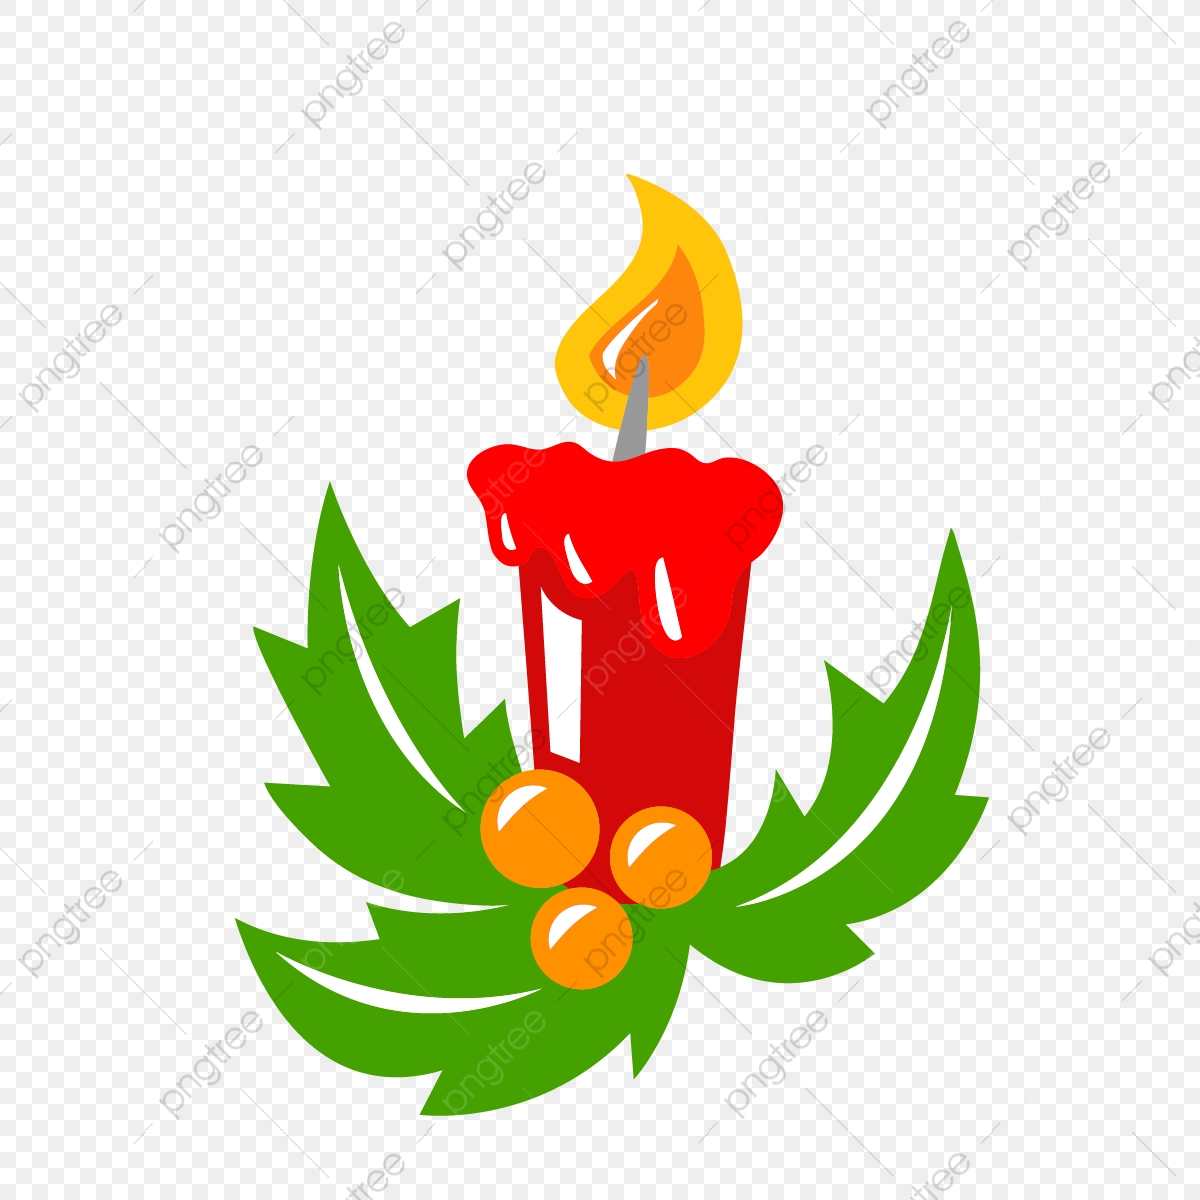 Candle Download Free